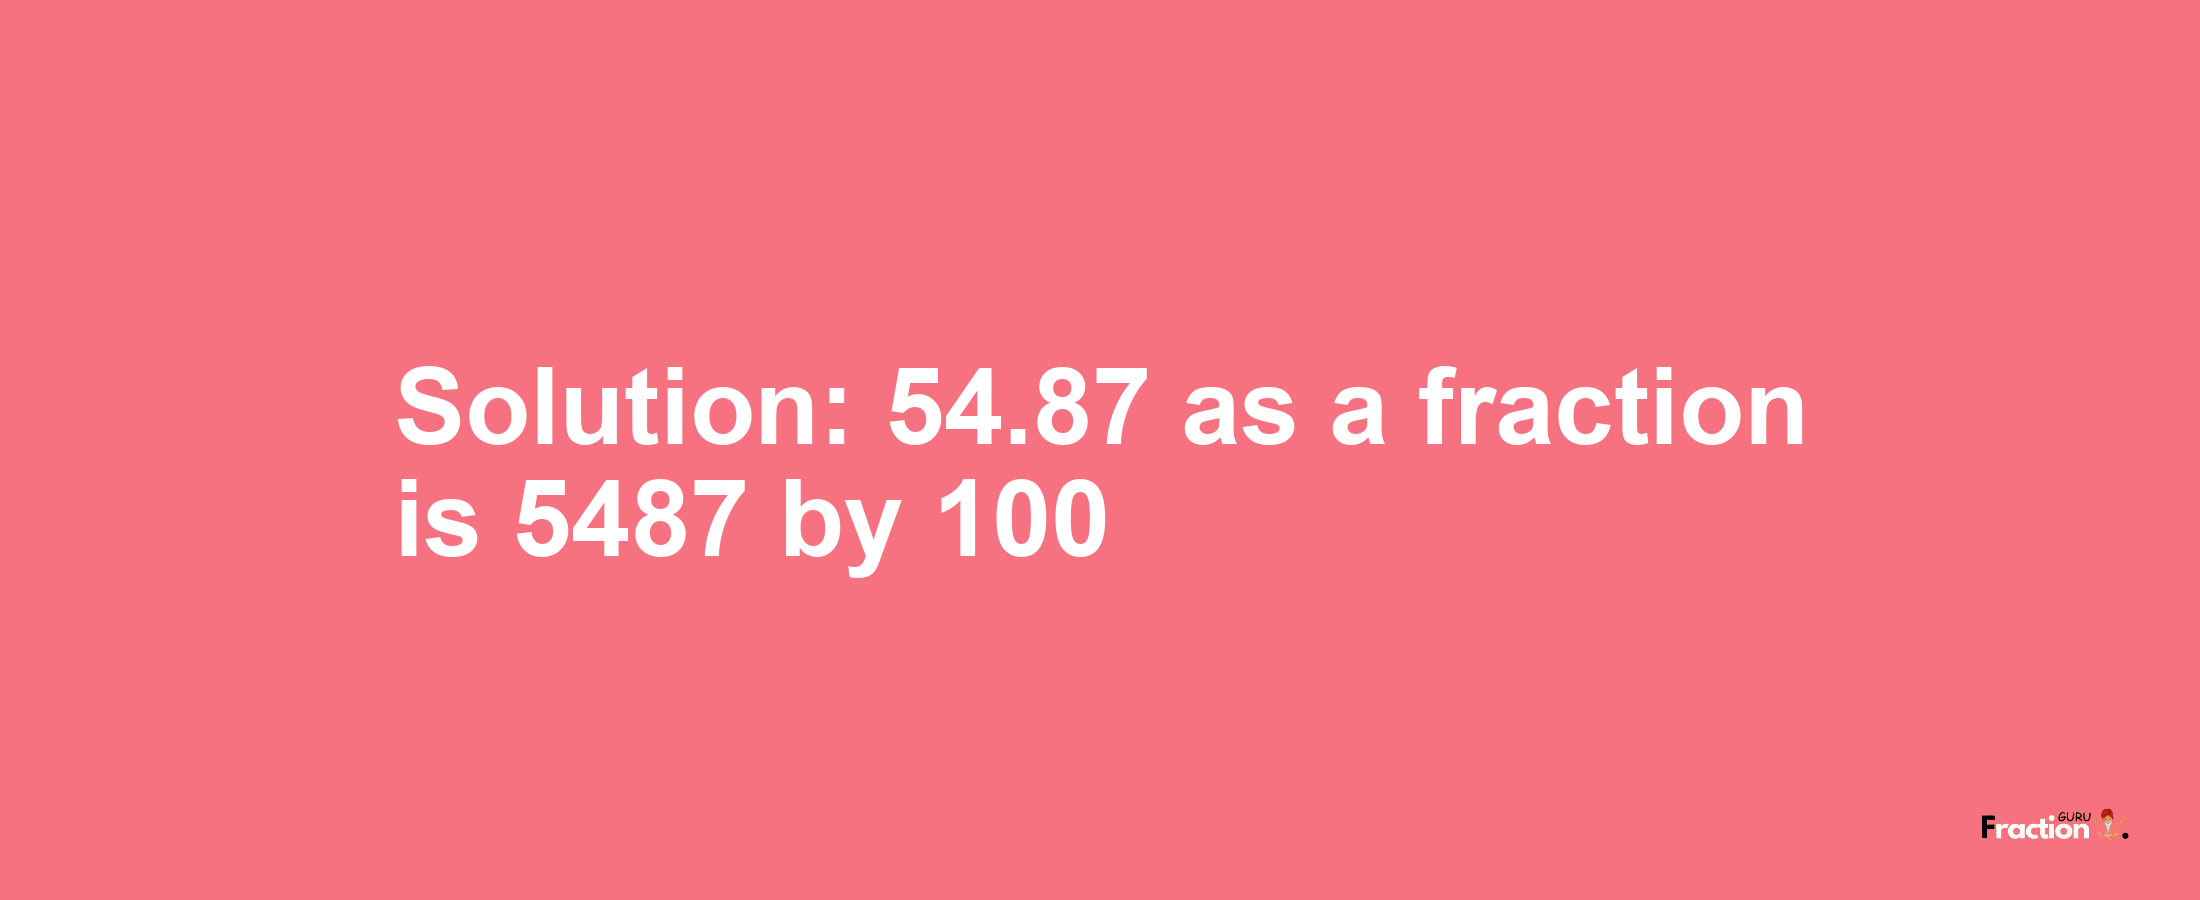 Solution:54.87 as a fraction is 5487/100